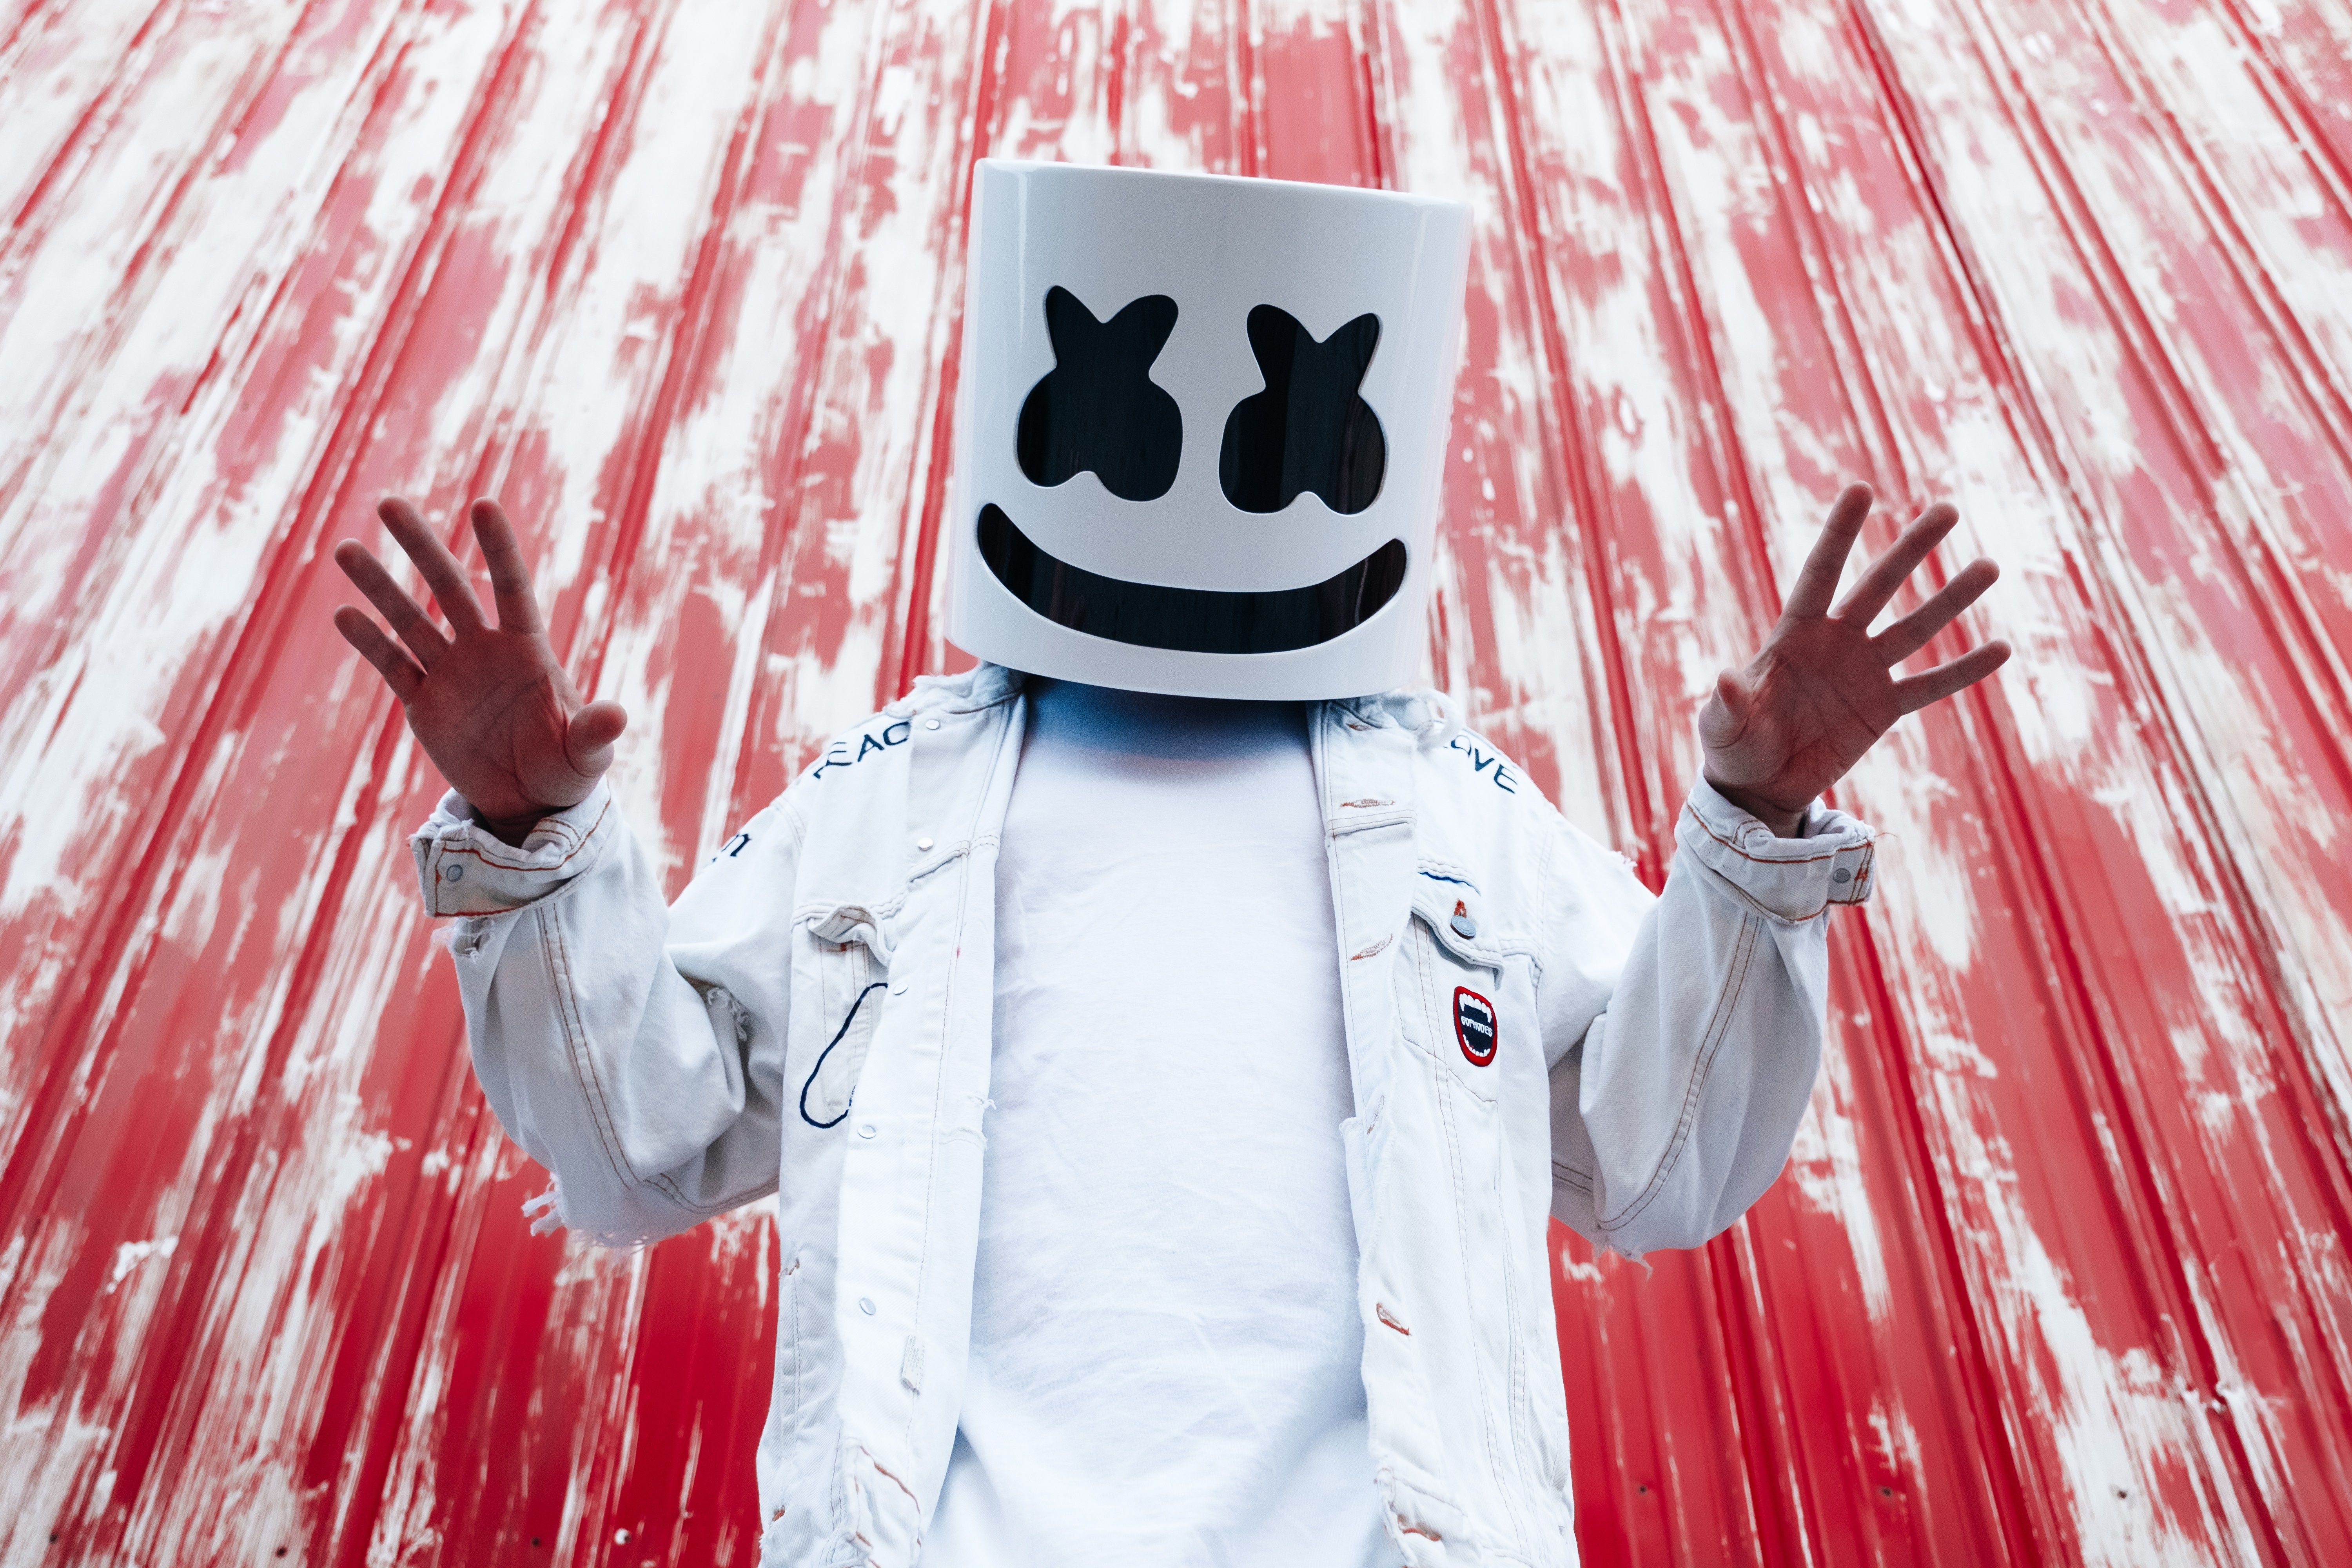 A man wearing a marshmallow headpiece and a white jacket in front of a red background - Marshmello